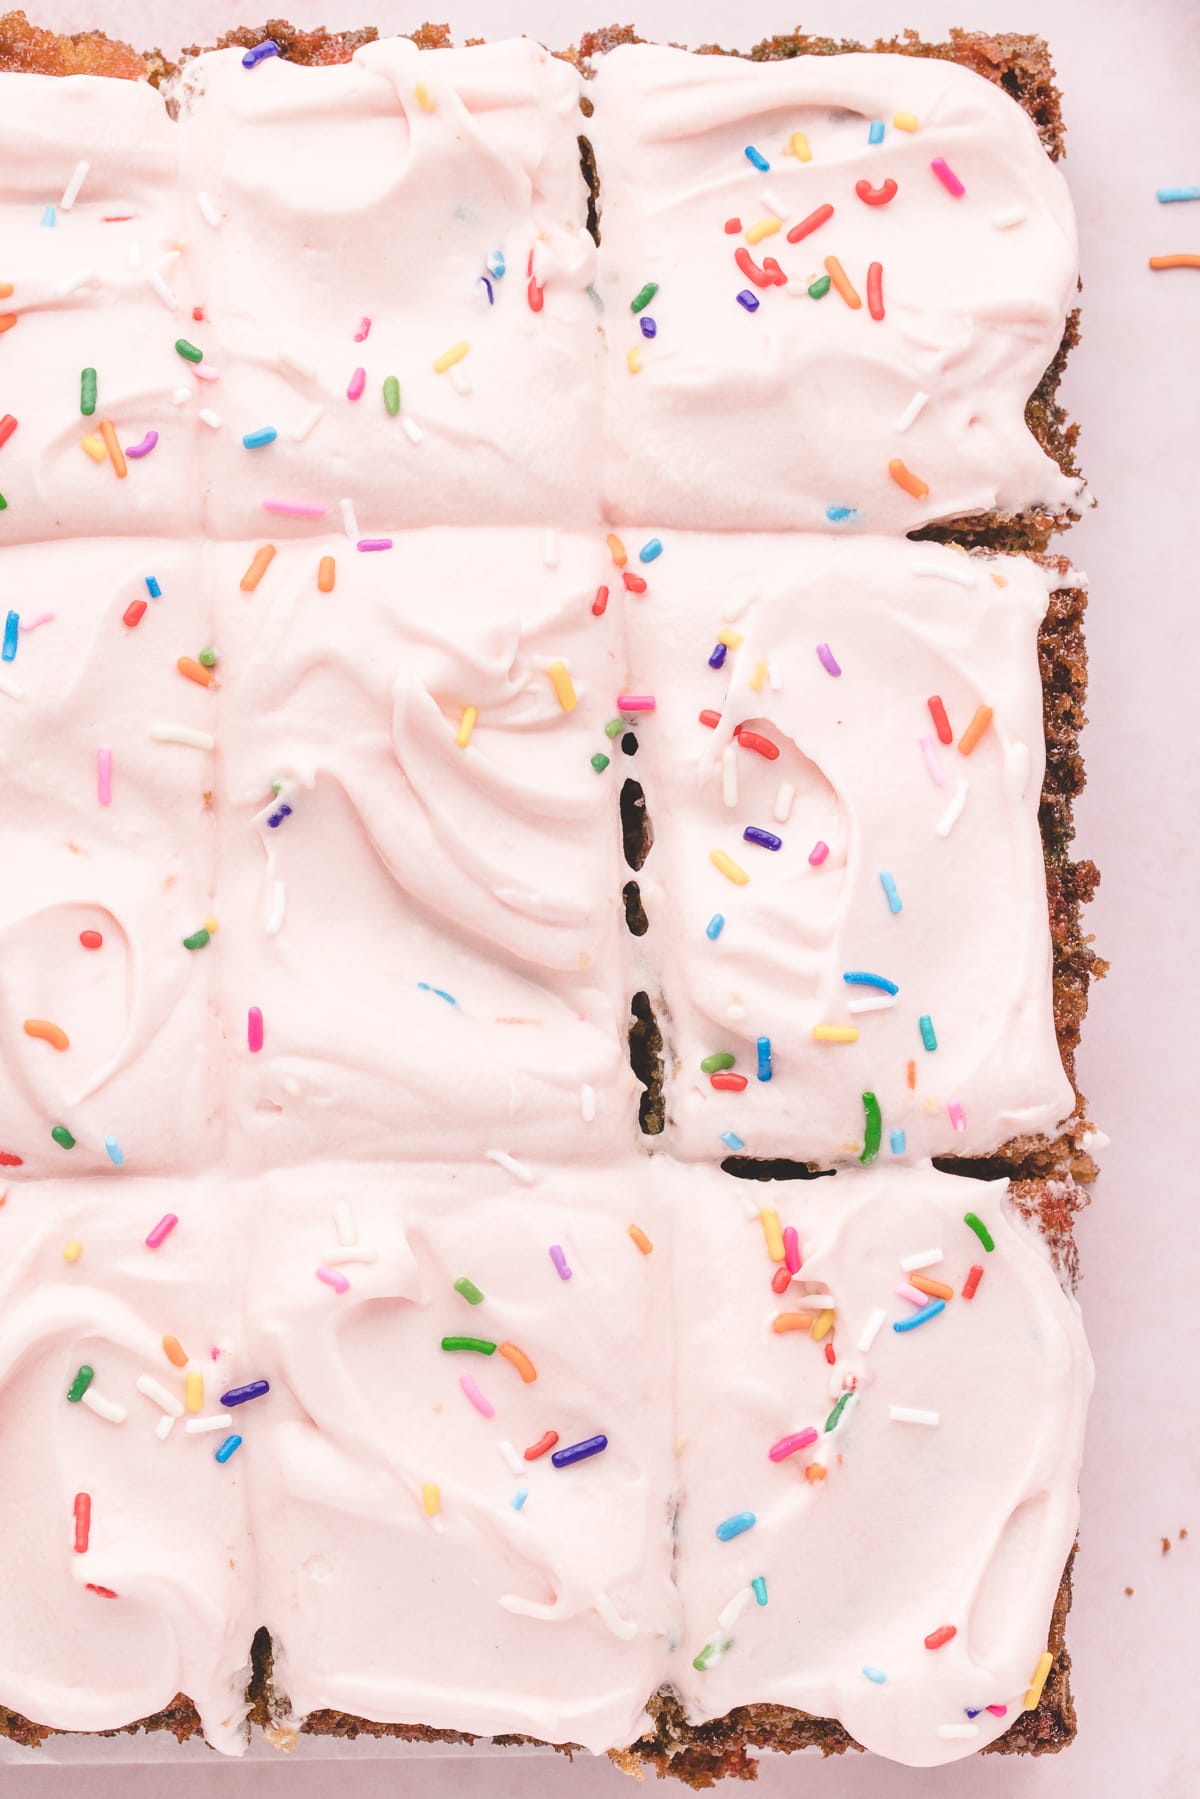 A frosted, sprinkled, and sliced sheet cake is presented on a white surface.